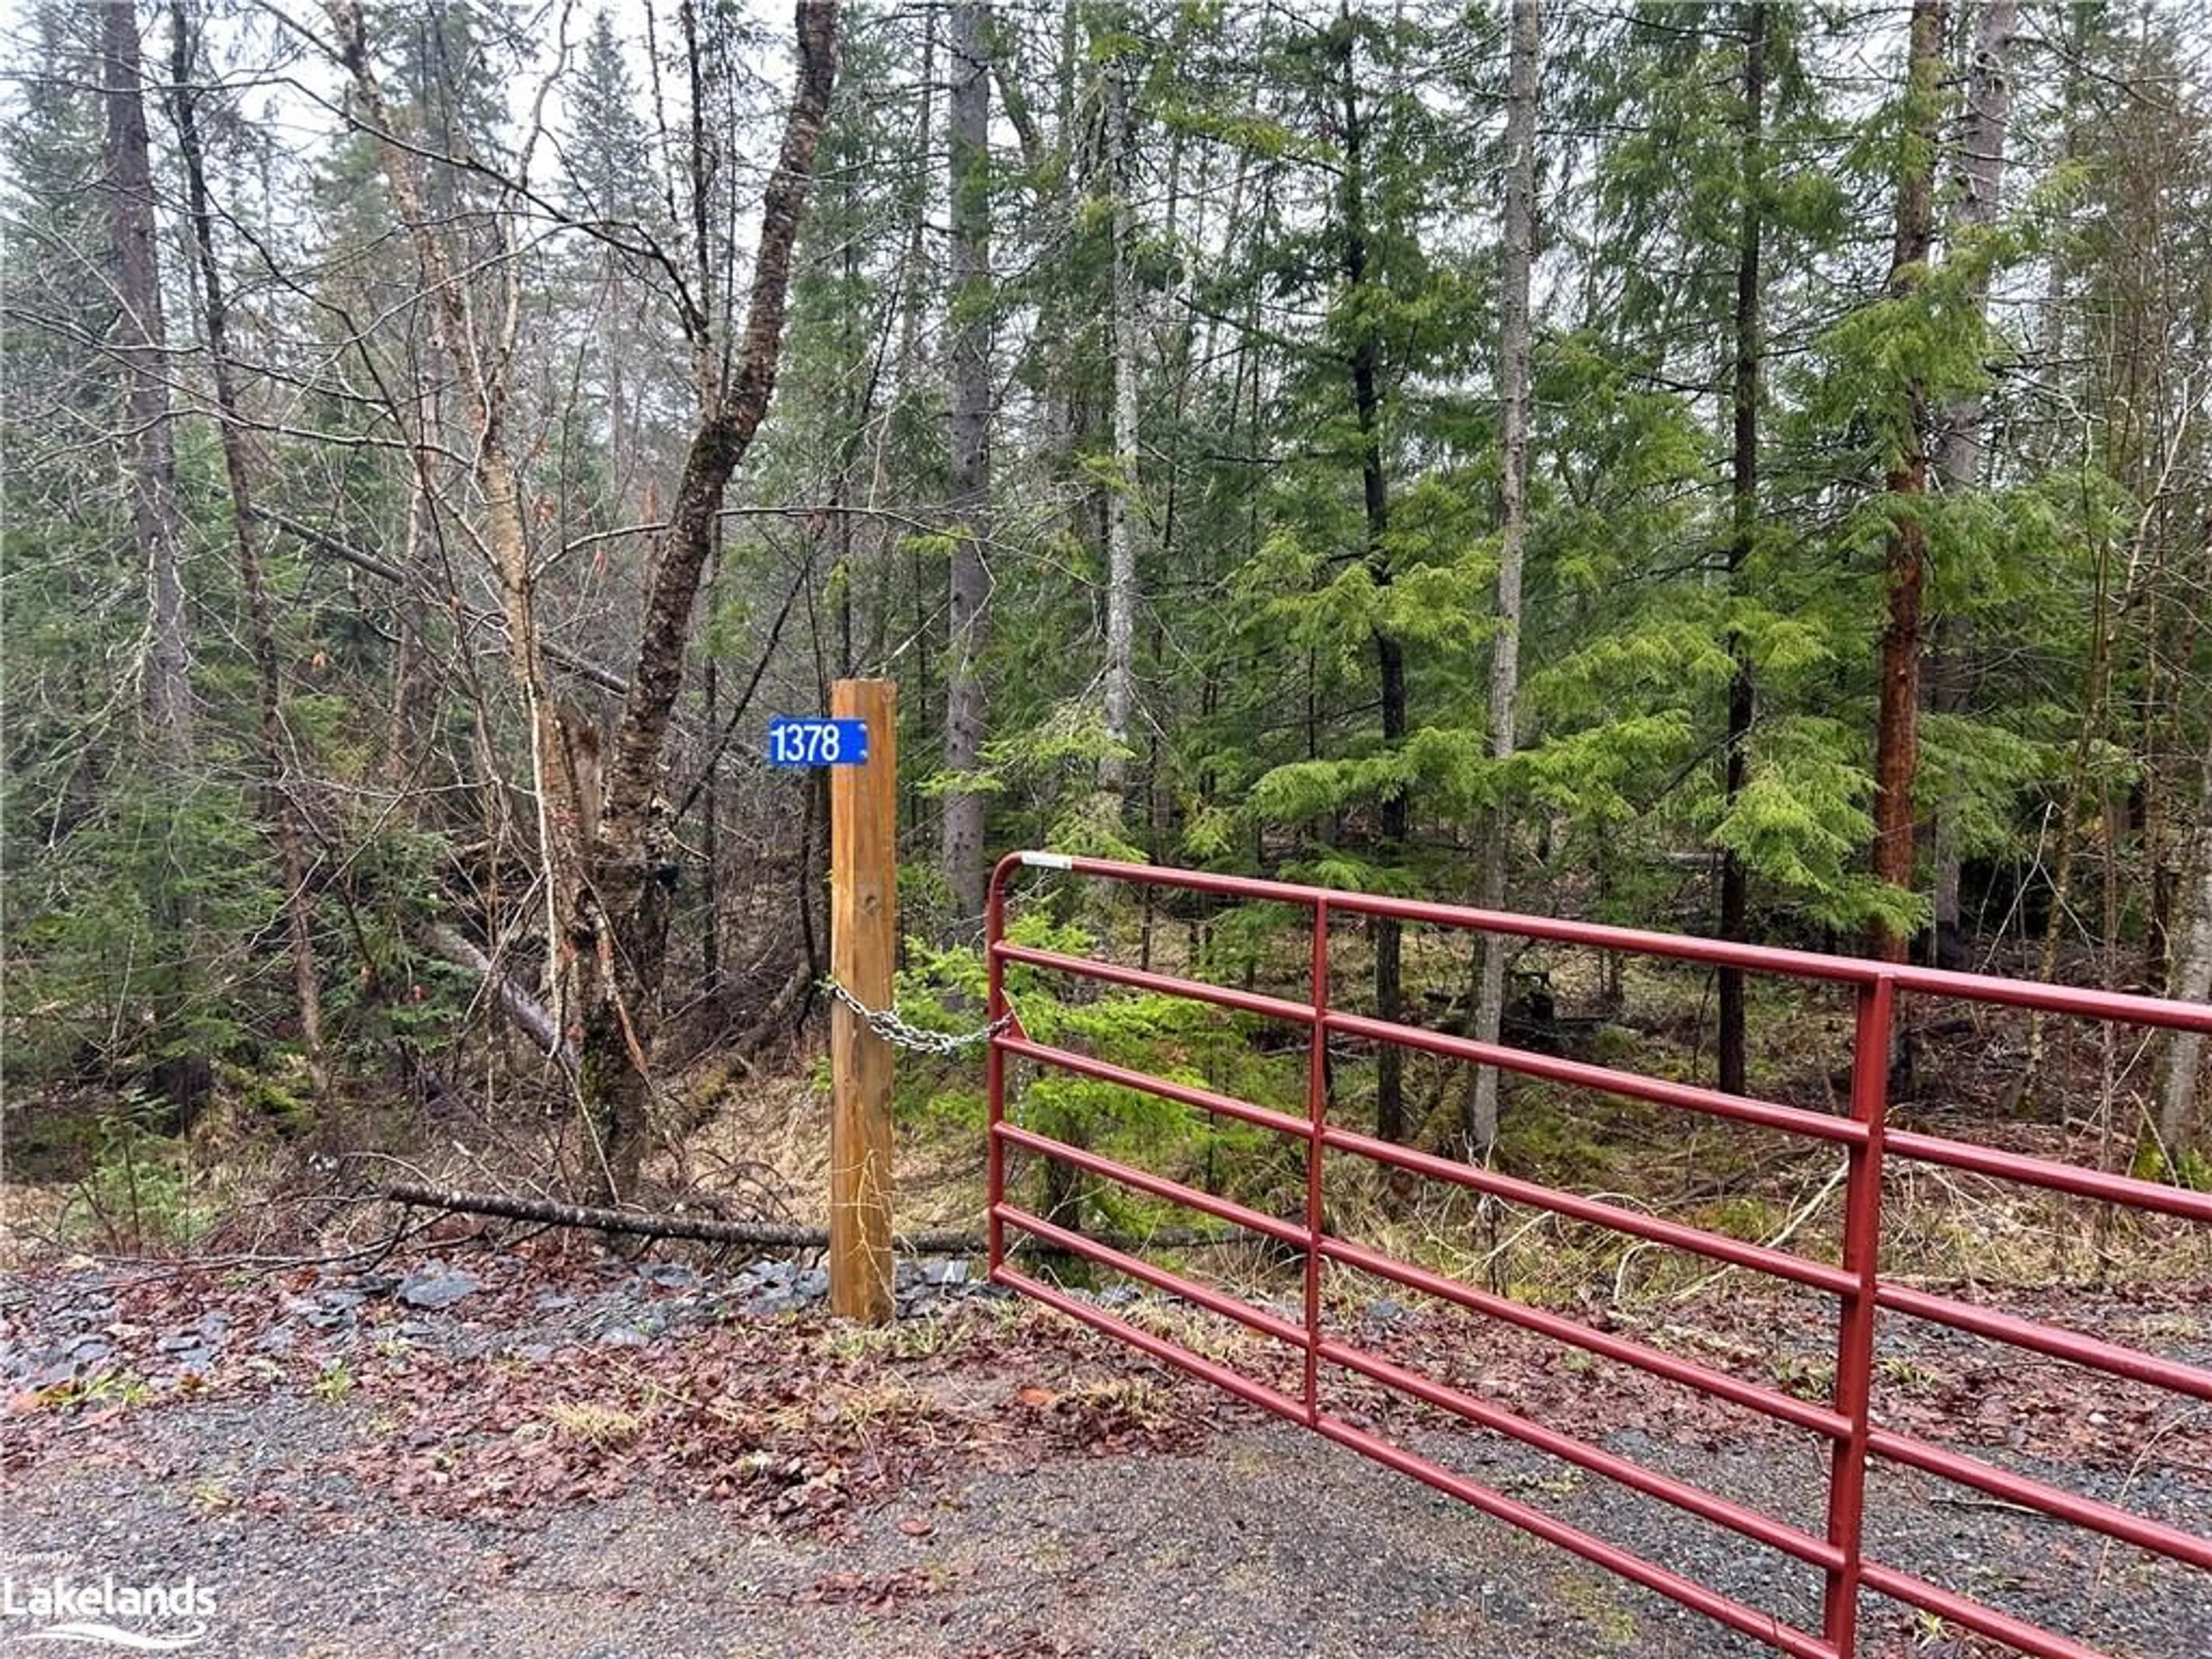 Fenced yard for 1378 North Mary Lake Rd, Huntsville Ontario P1H 2J3